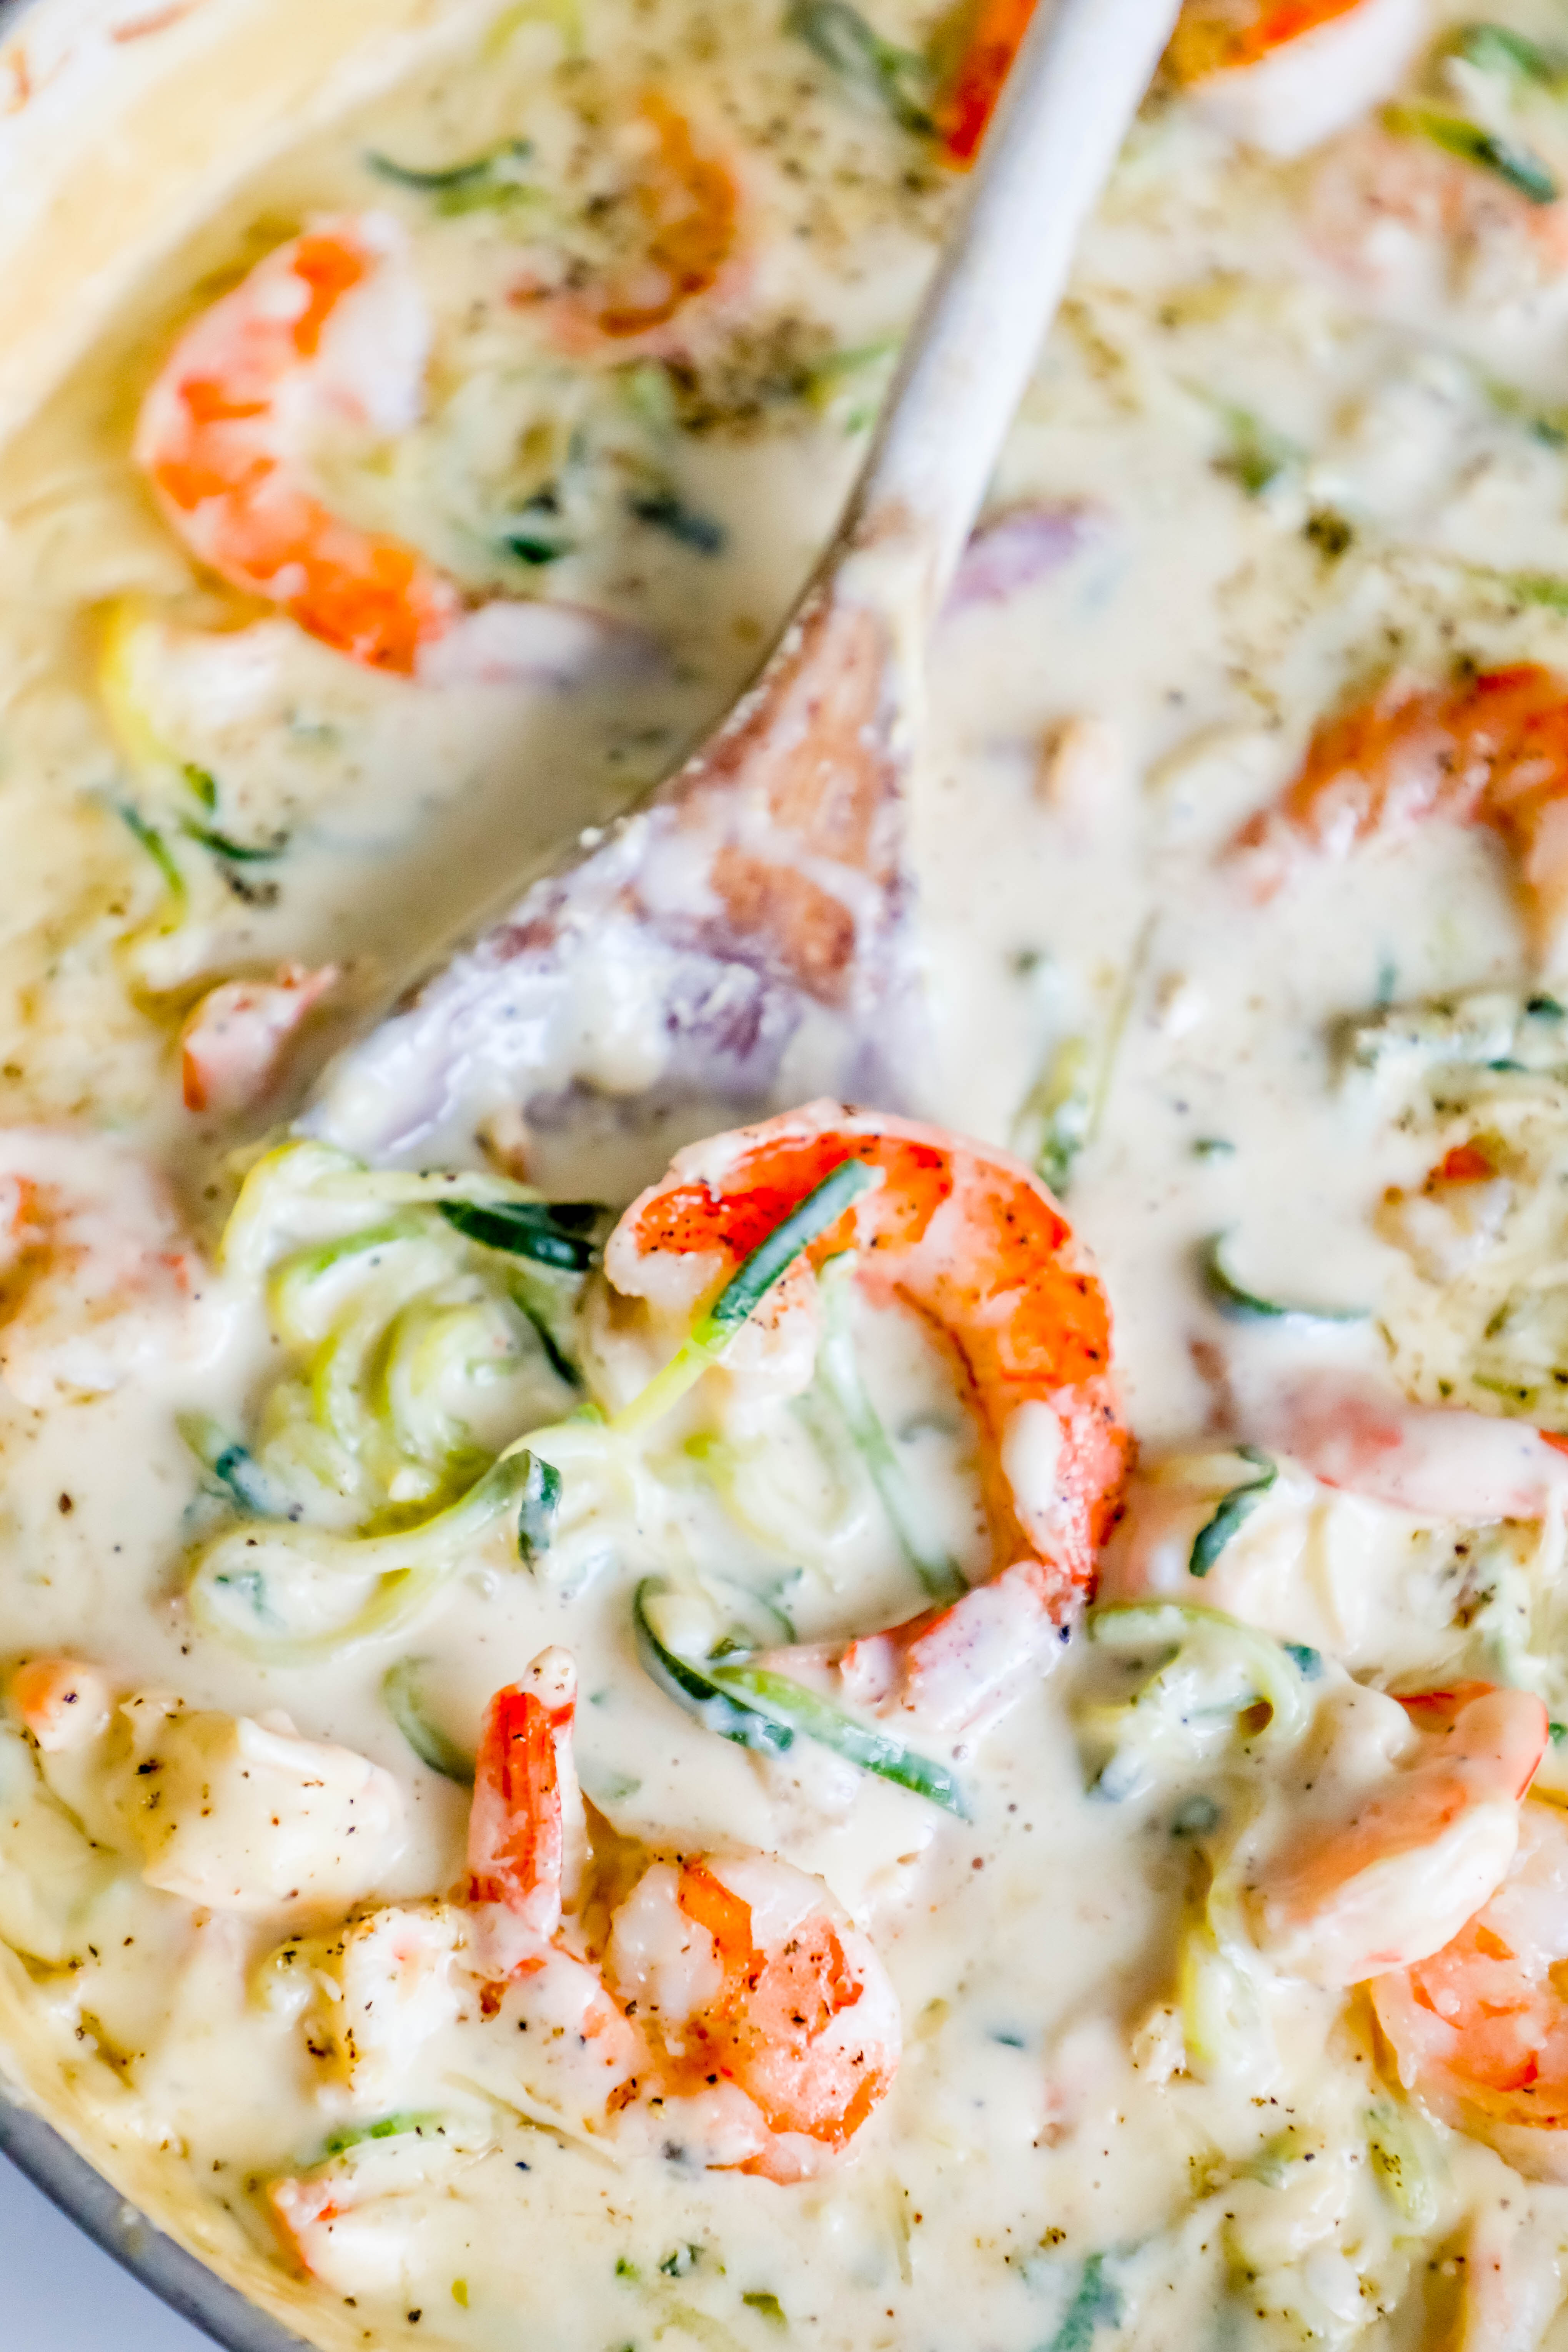 shrimp in a creamy sauce with noodles made out of zucchini